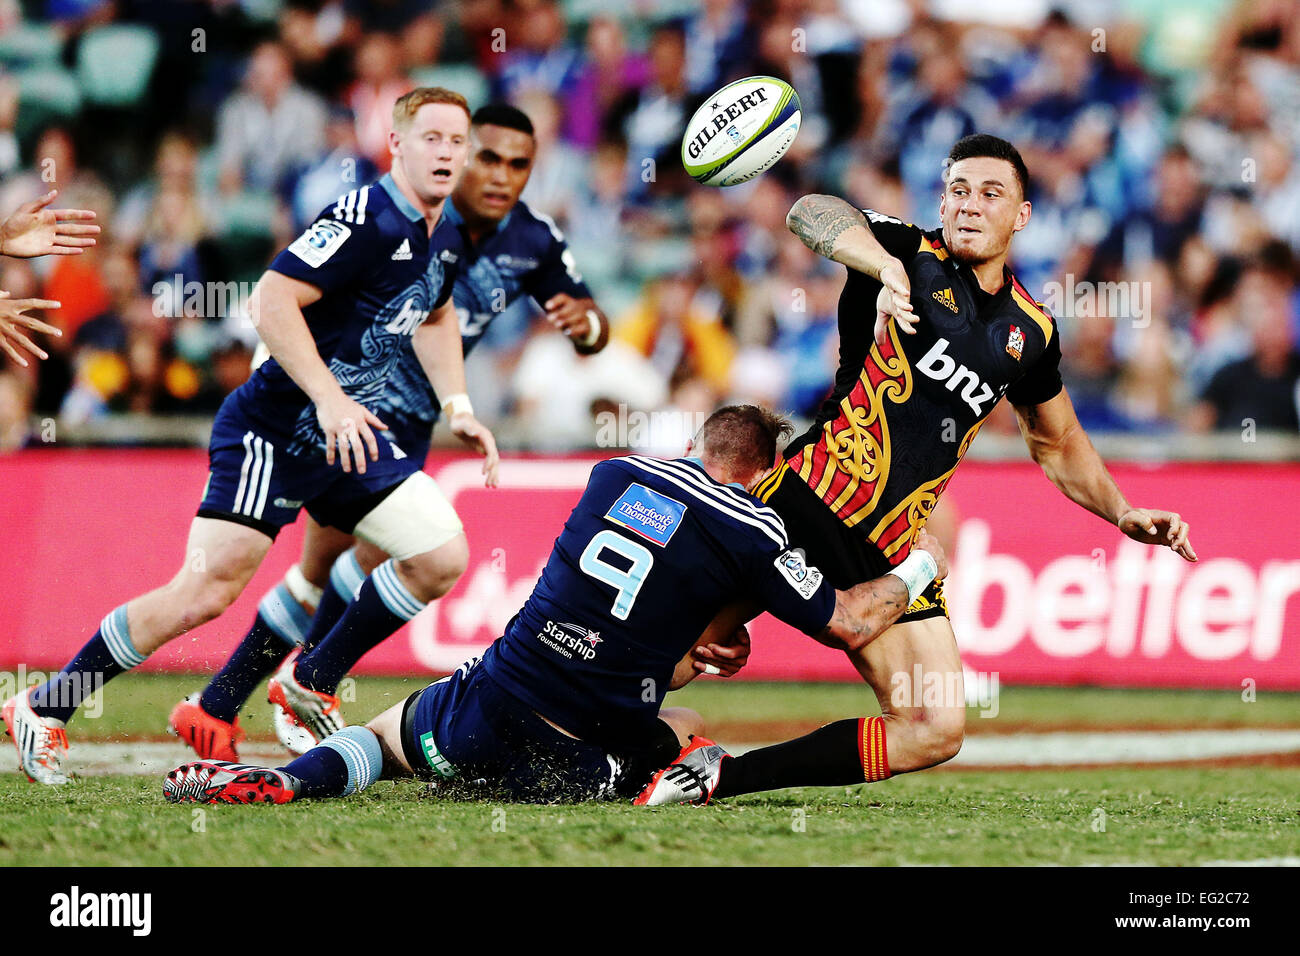 Auckland, New Zealand. 14th Feb, 2015. Sonny Bill Williams of the Chiefs with an offload in the tackle from Jimmy Cowan of the Blues. Super Rugby match, Blues (Auckland) versus Chiefs (Hamilton) at QBE Stadium, Auckland, New Zealand. Saturday 14 February 2015. The Chiefs ran out winners by 18-23 in a close derby. © Action Plus Sports/Alamy Live News Stock Photo